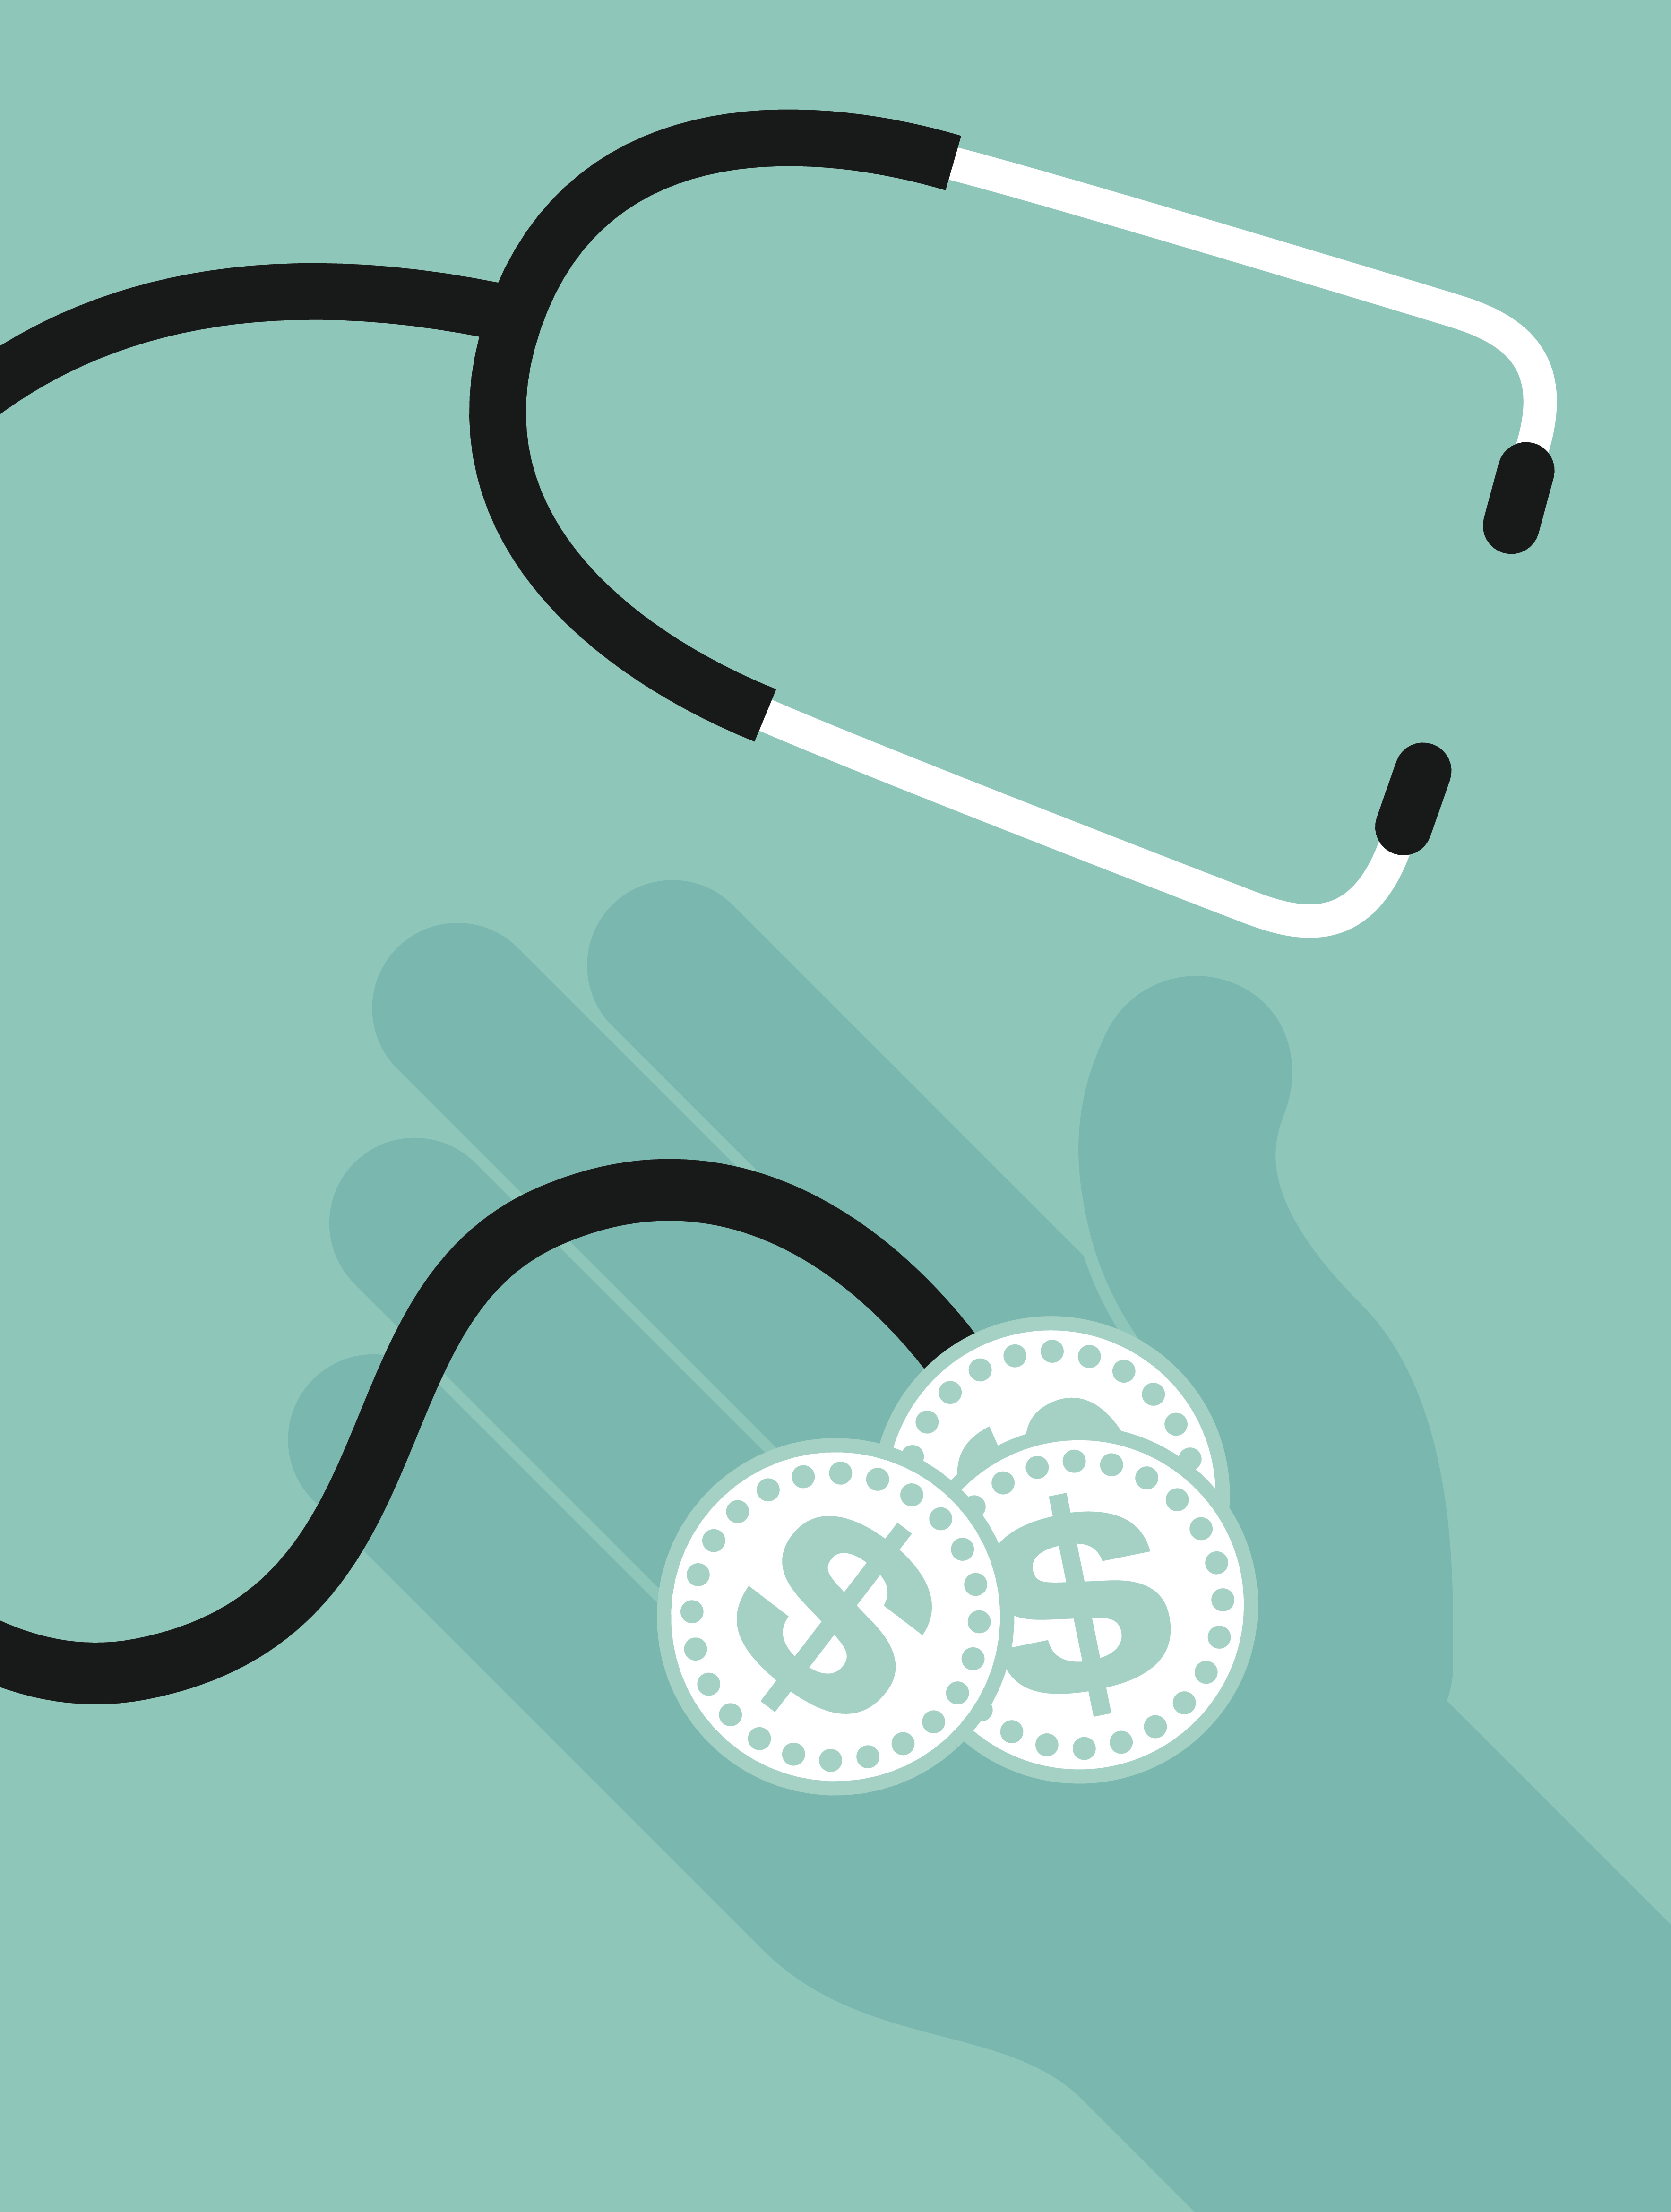 Stethoscope checking hand holding dollar coins